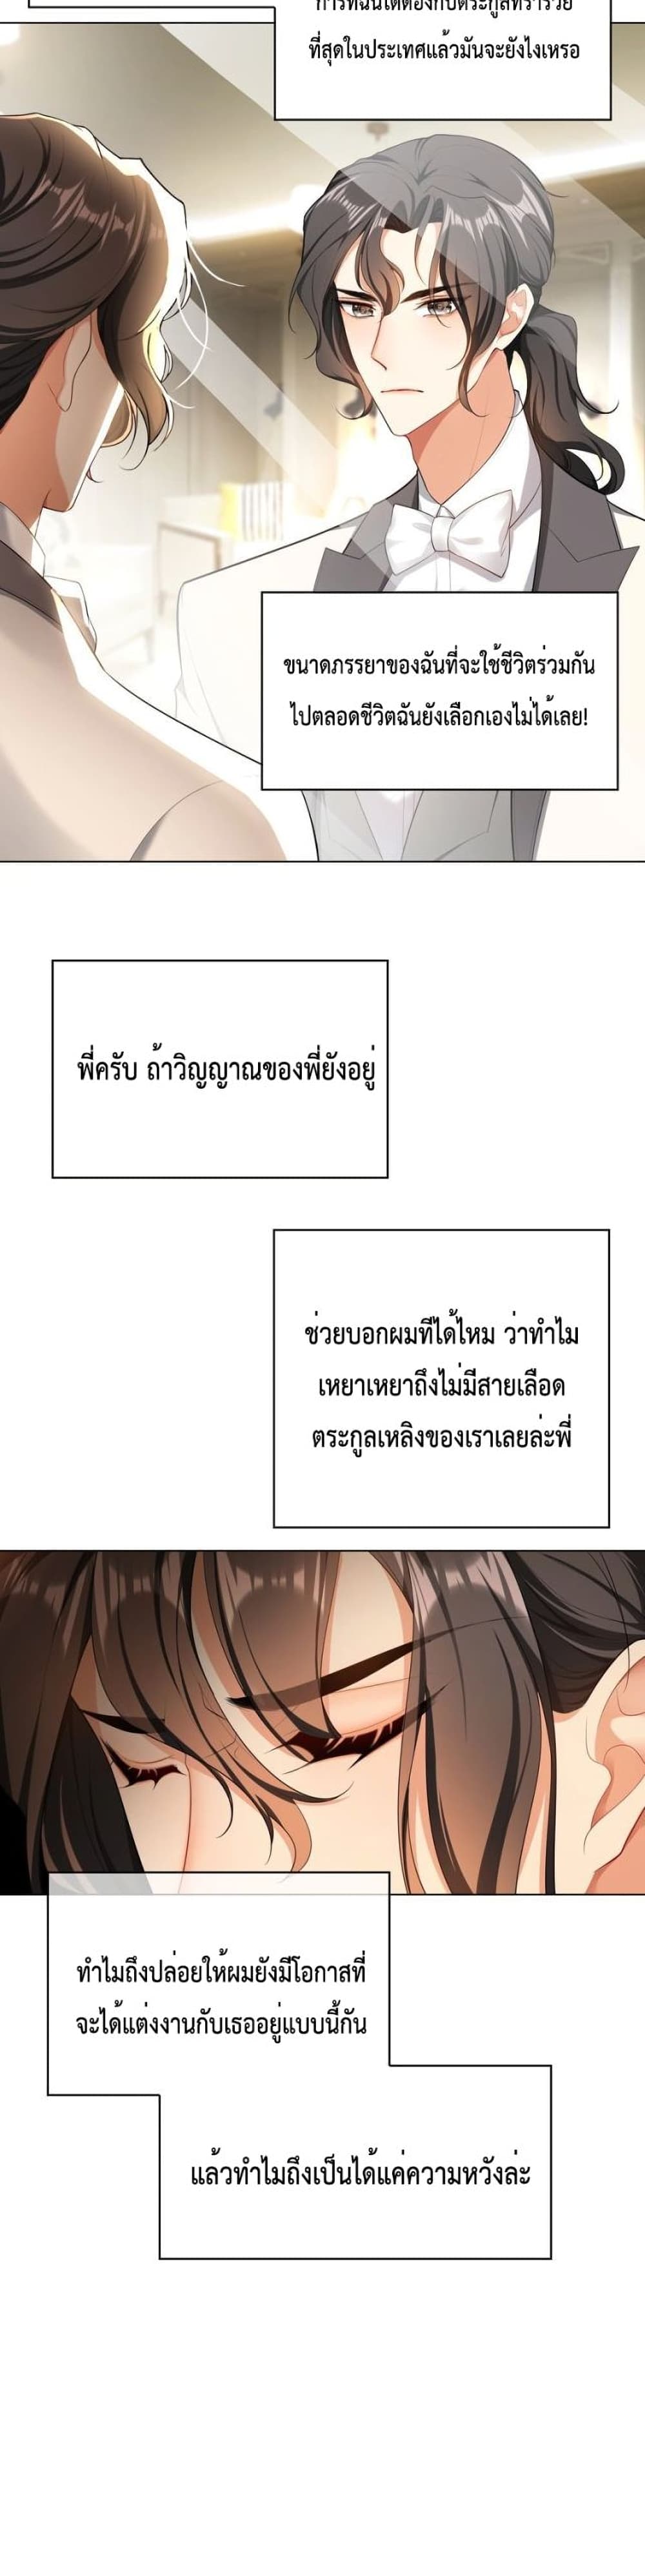 Game of Affection ตอนที่ 85 (16)